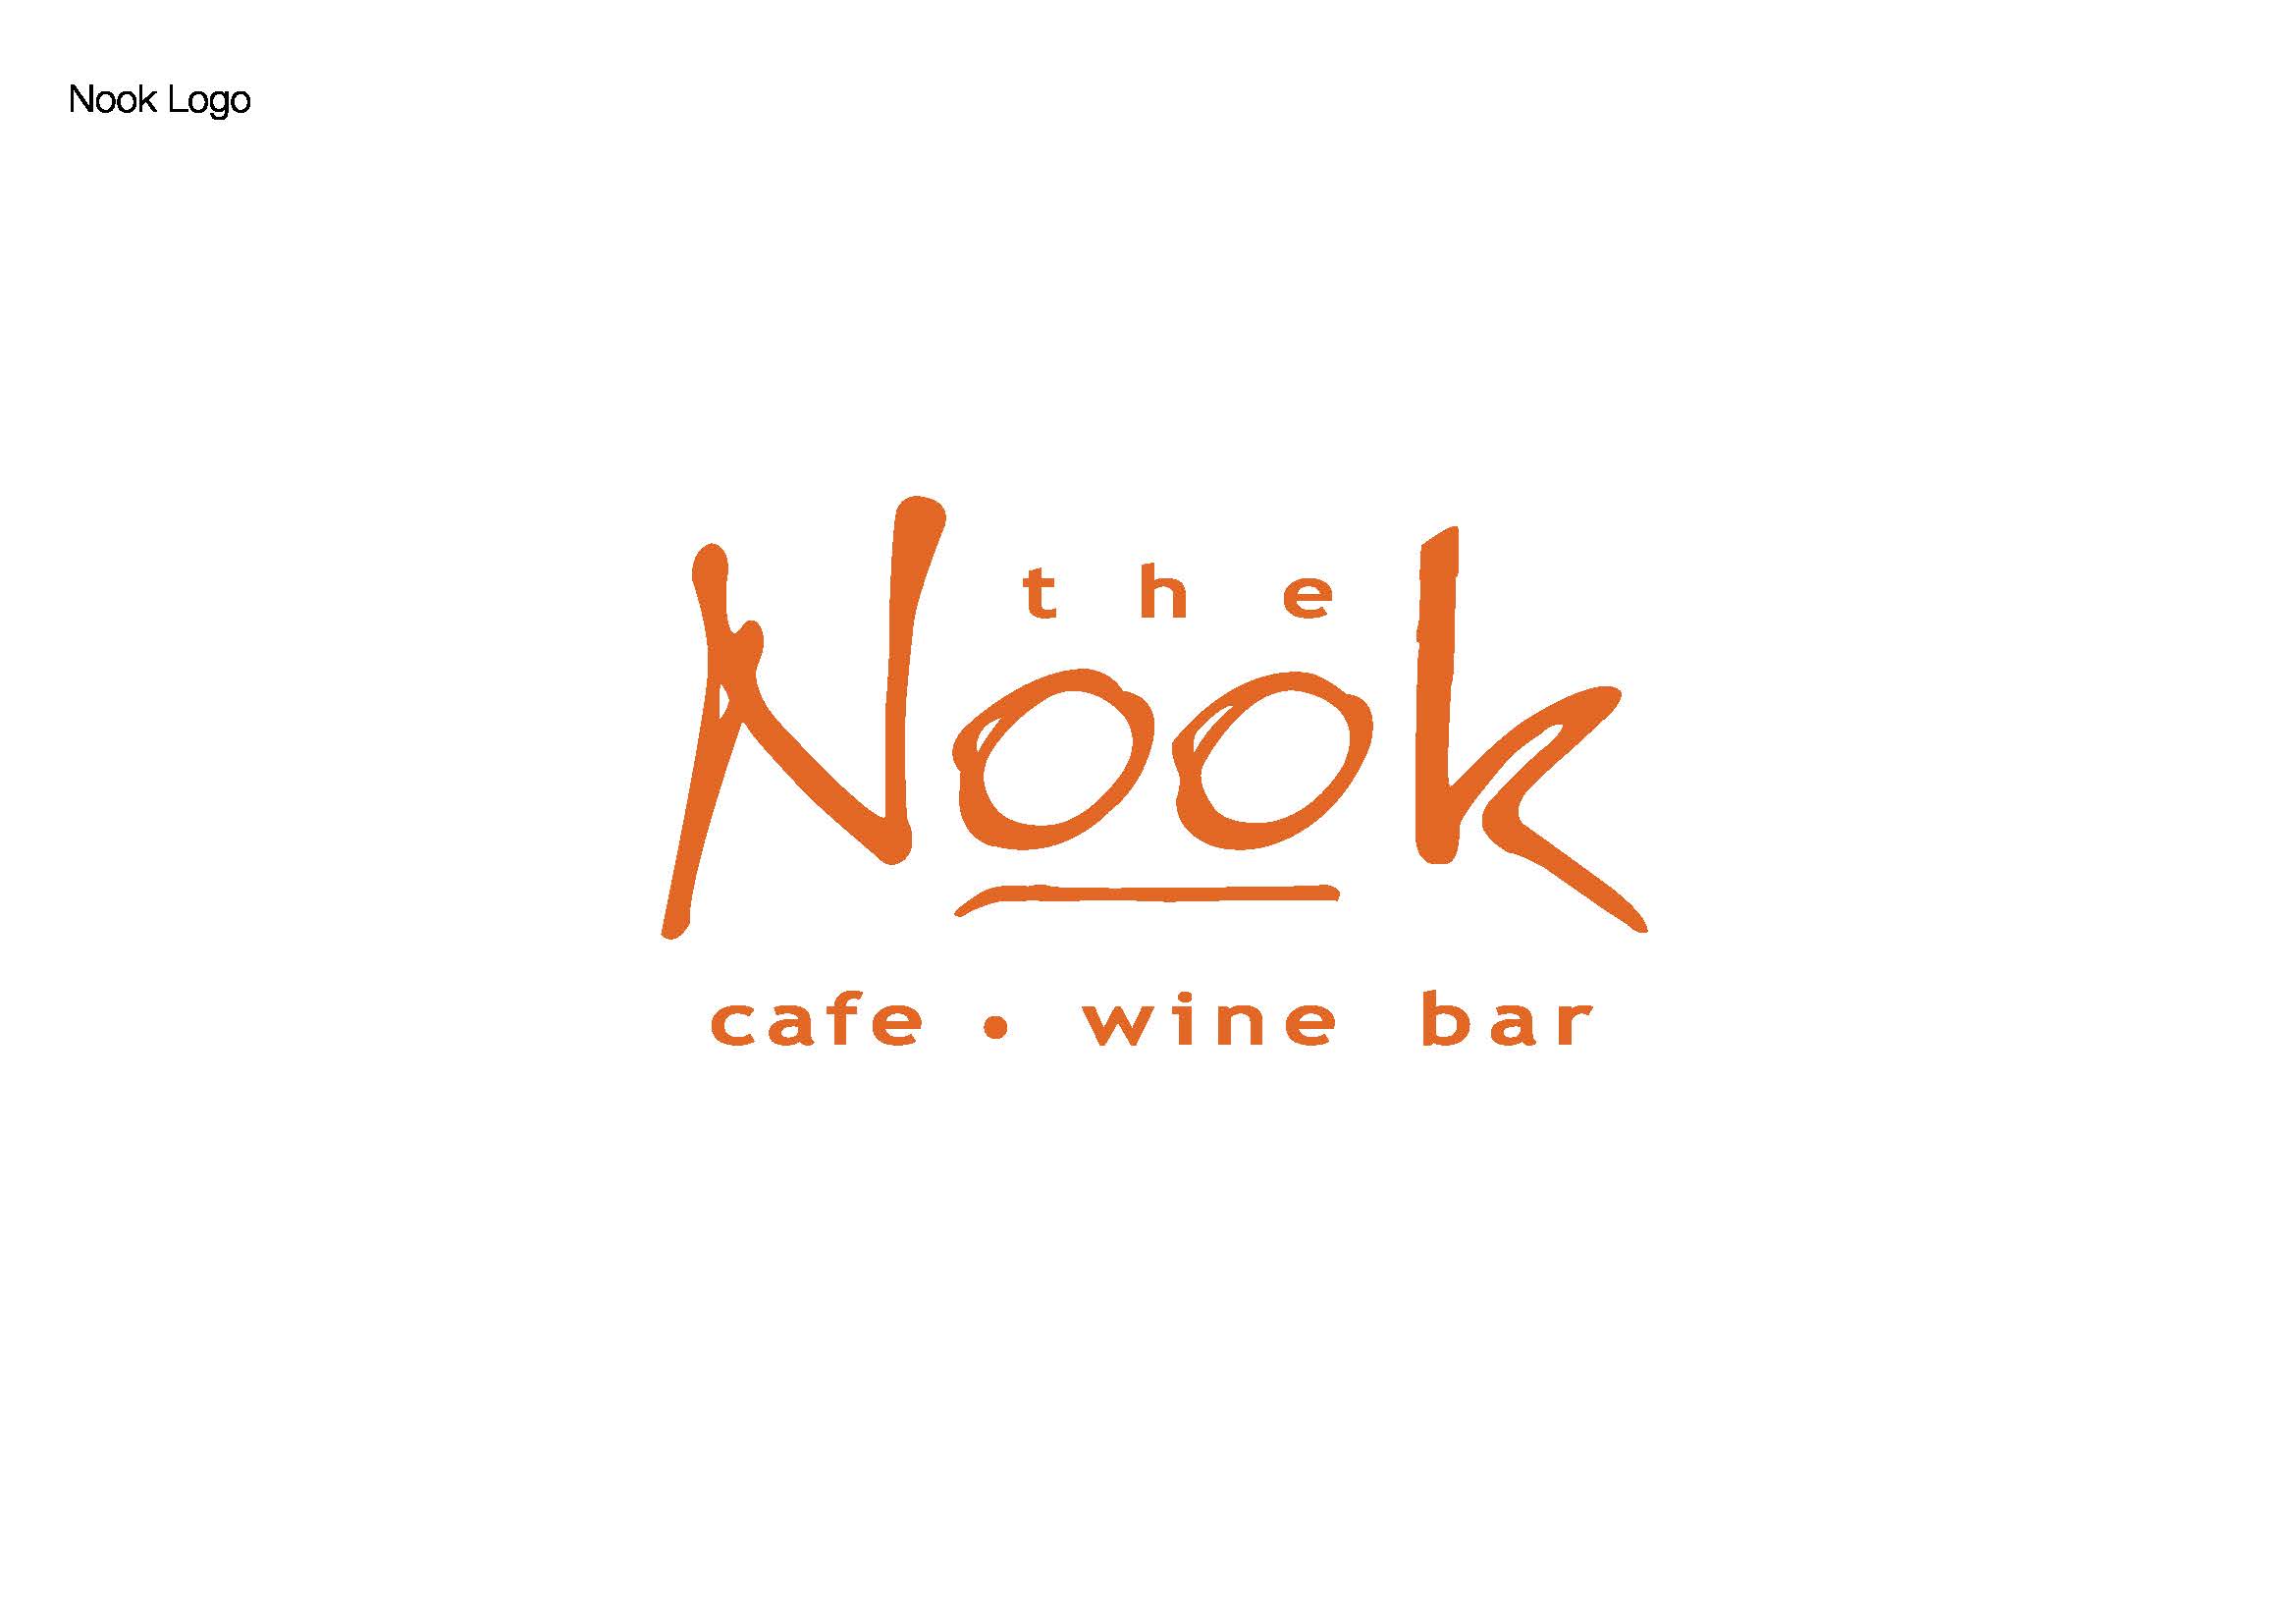 Images The Nook Cafe